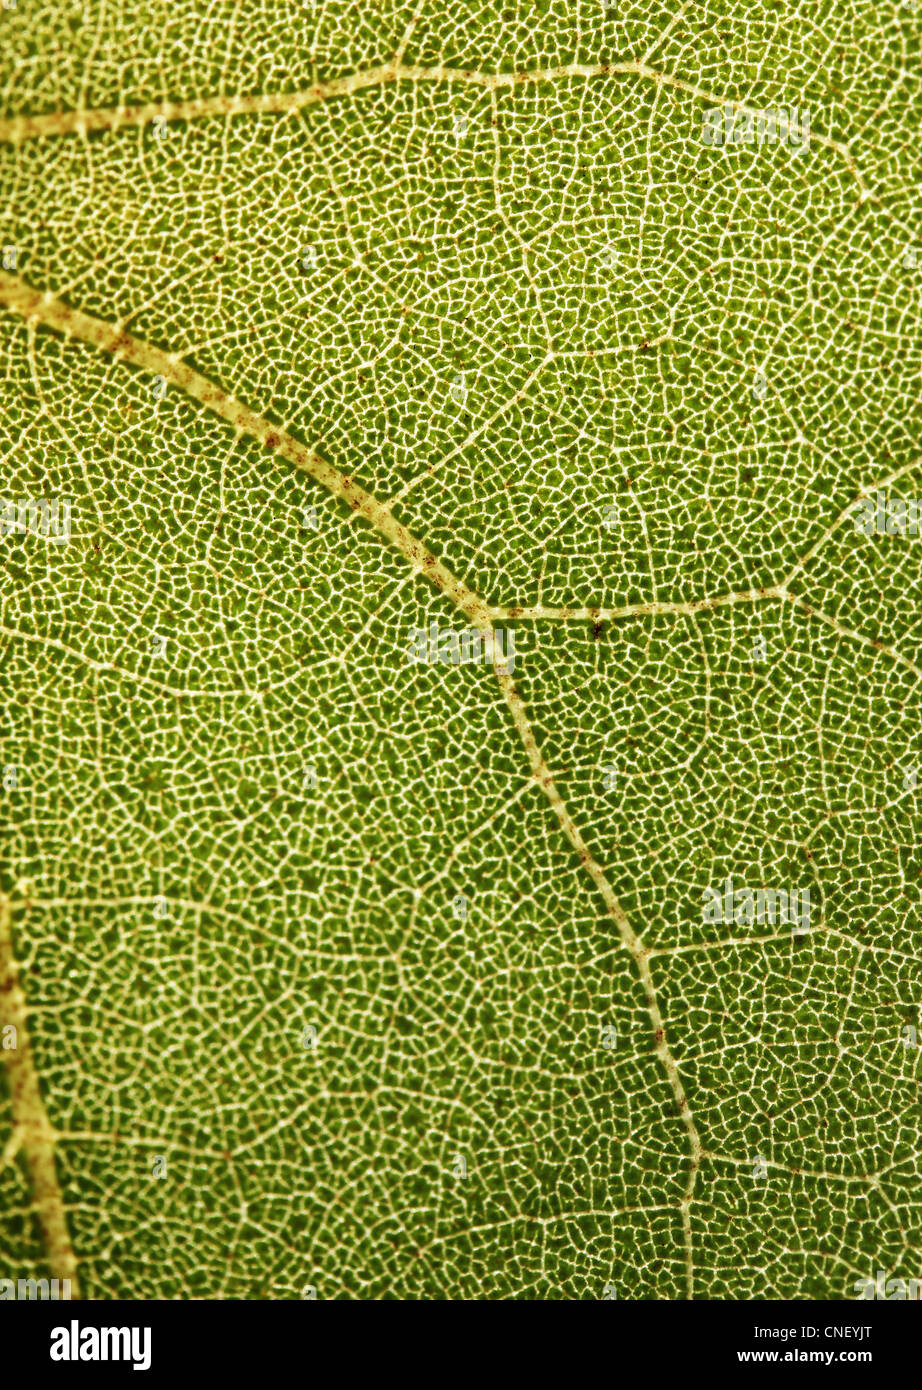 Highly detailed close up photo of a plant foliage showing web of veins Stock Photo